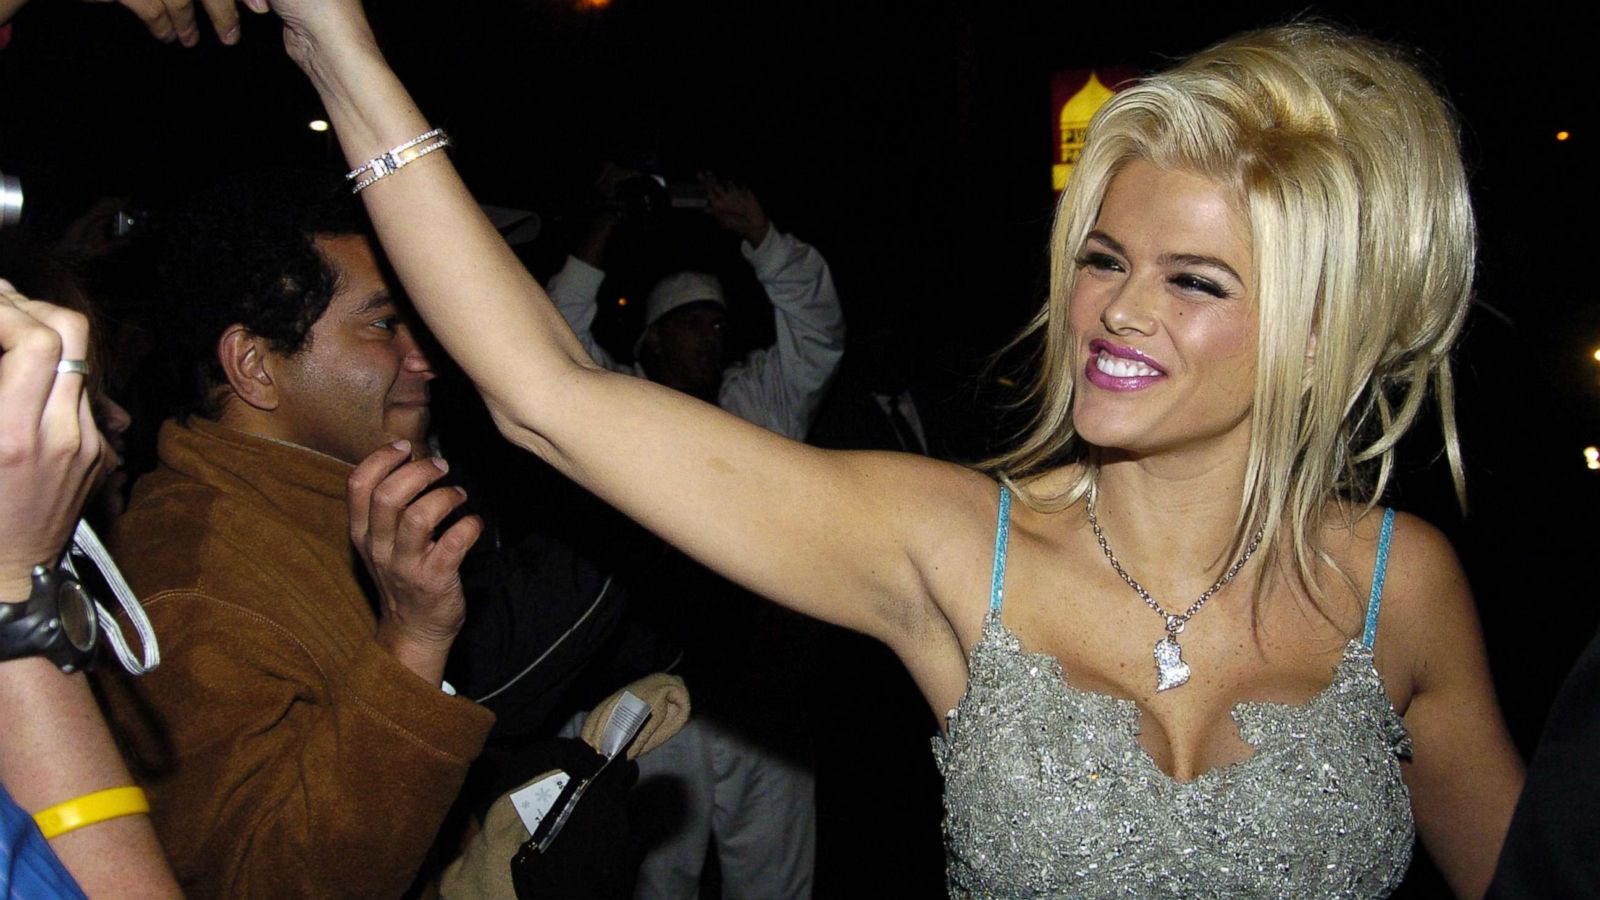 anna nicole smith before and after weight loss